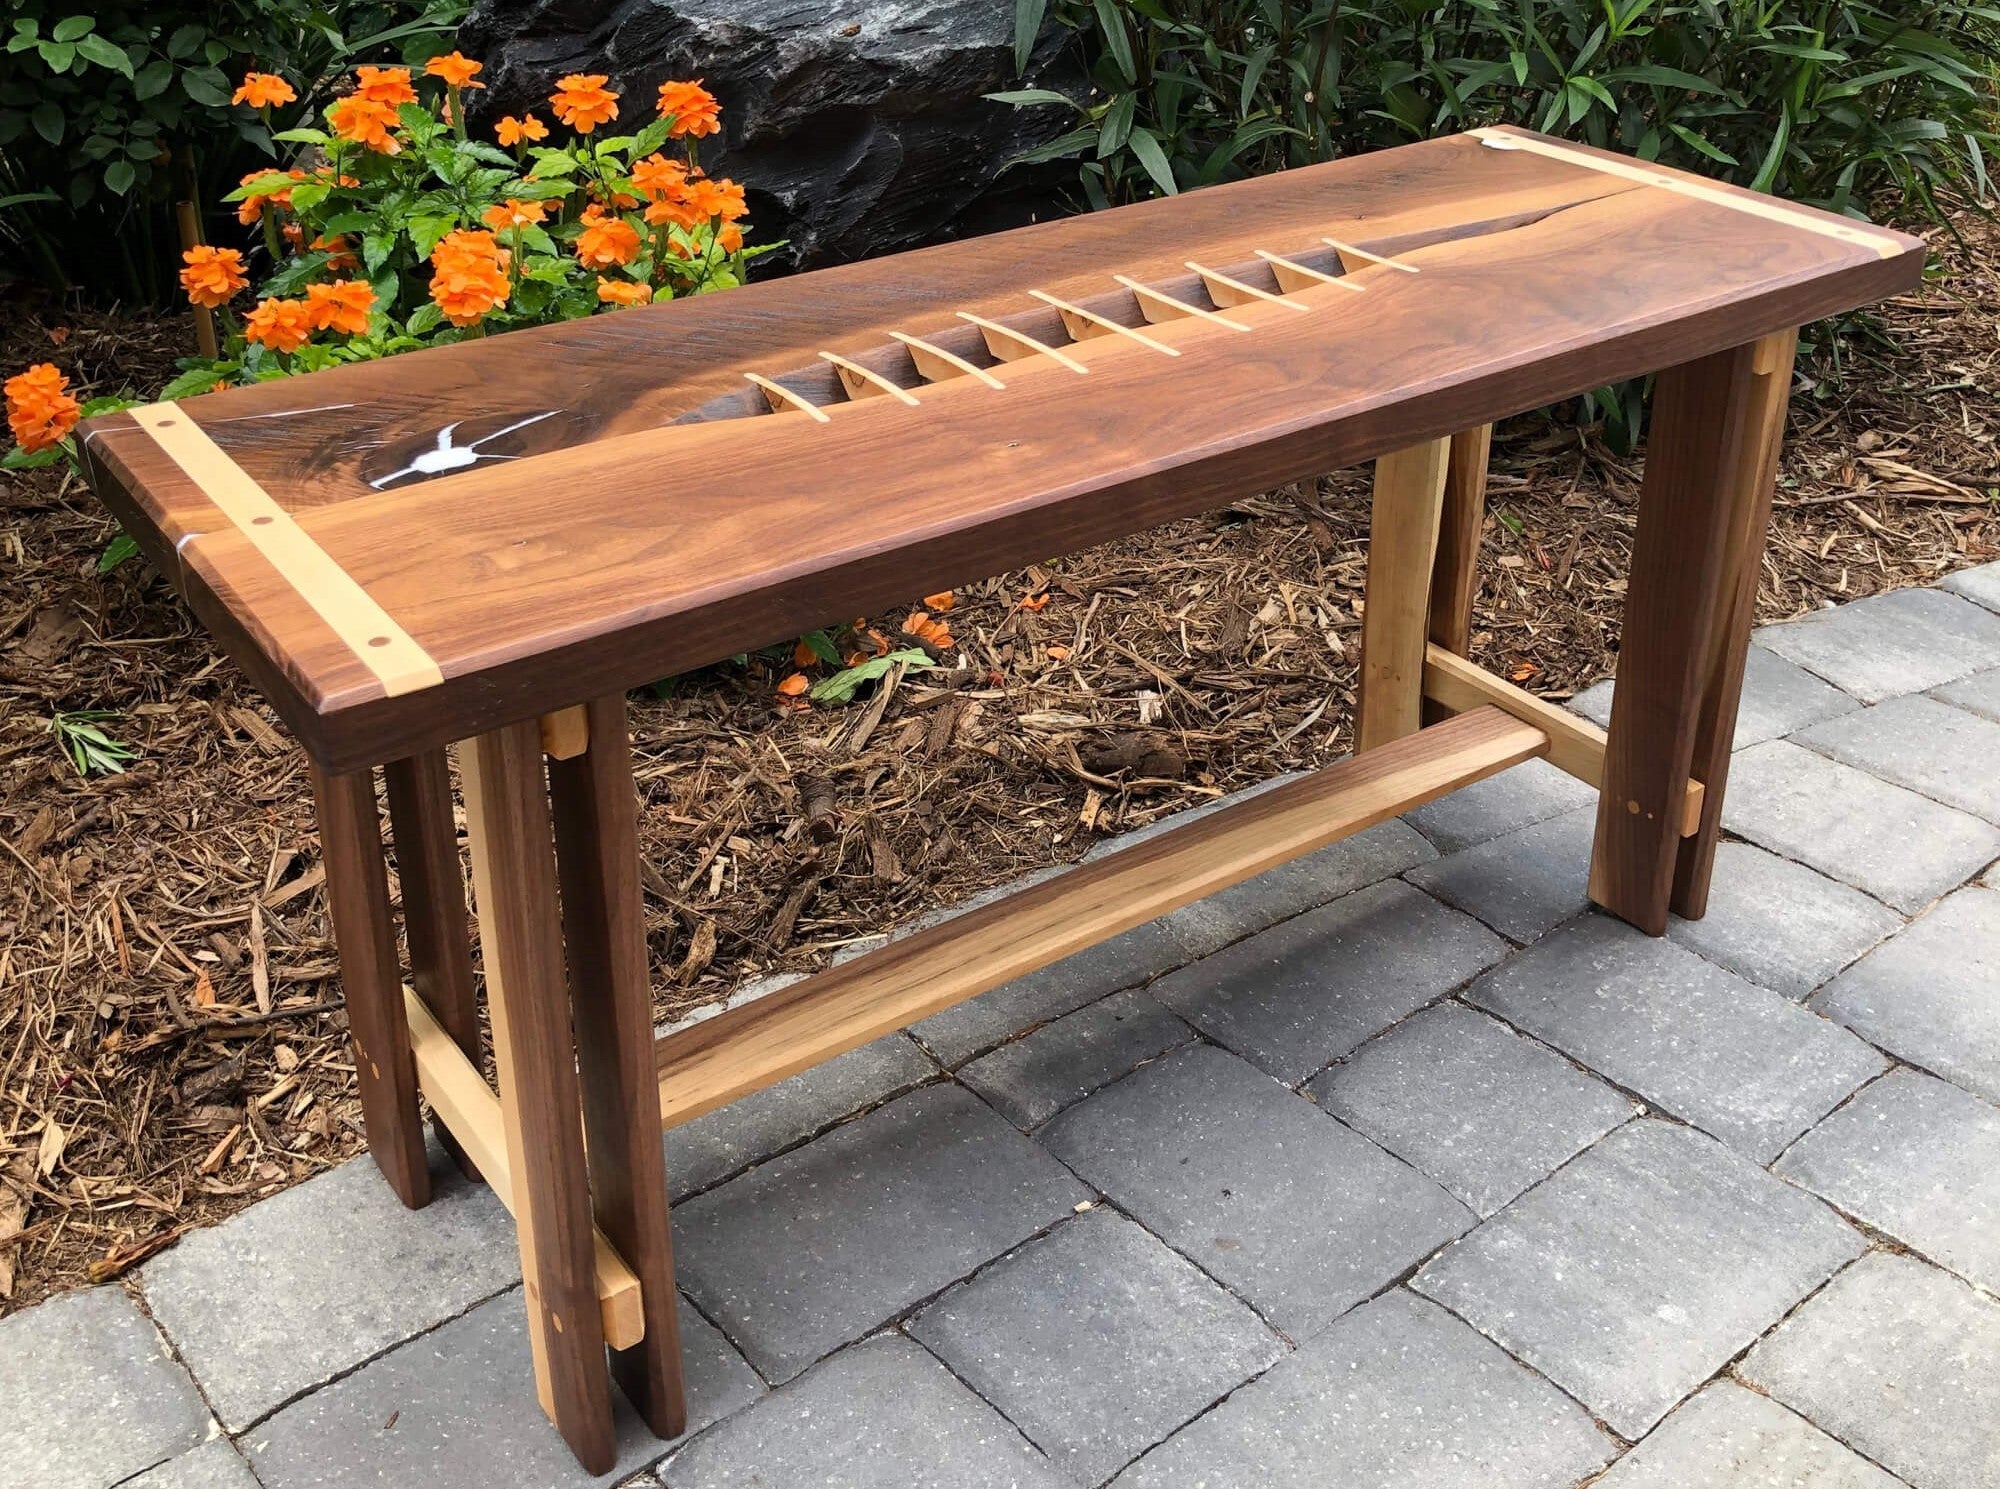 Walnut bench with maple accents finished with Rubio Monocoat hard wax oil wood finish.